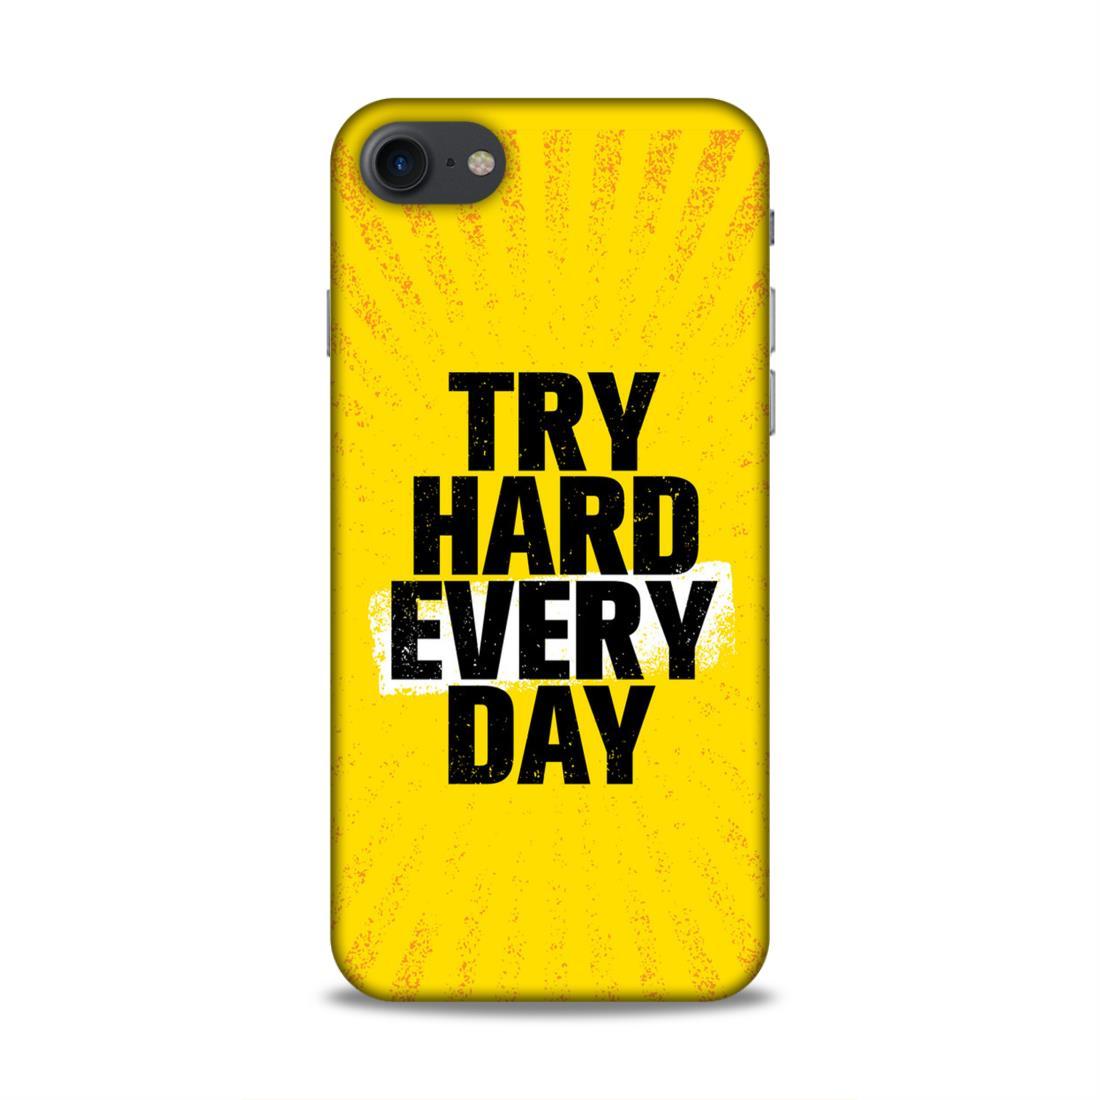 Try Hard Every Day iPhone 8 Mobile Case Cover